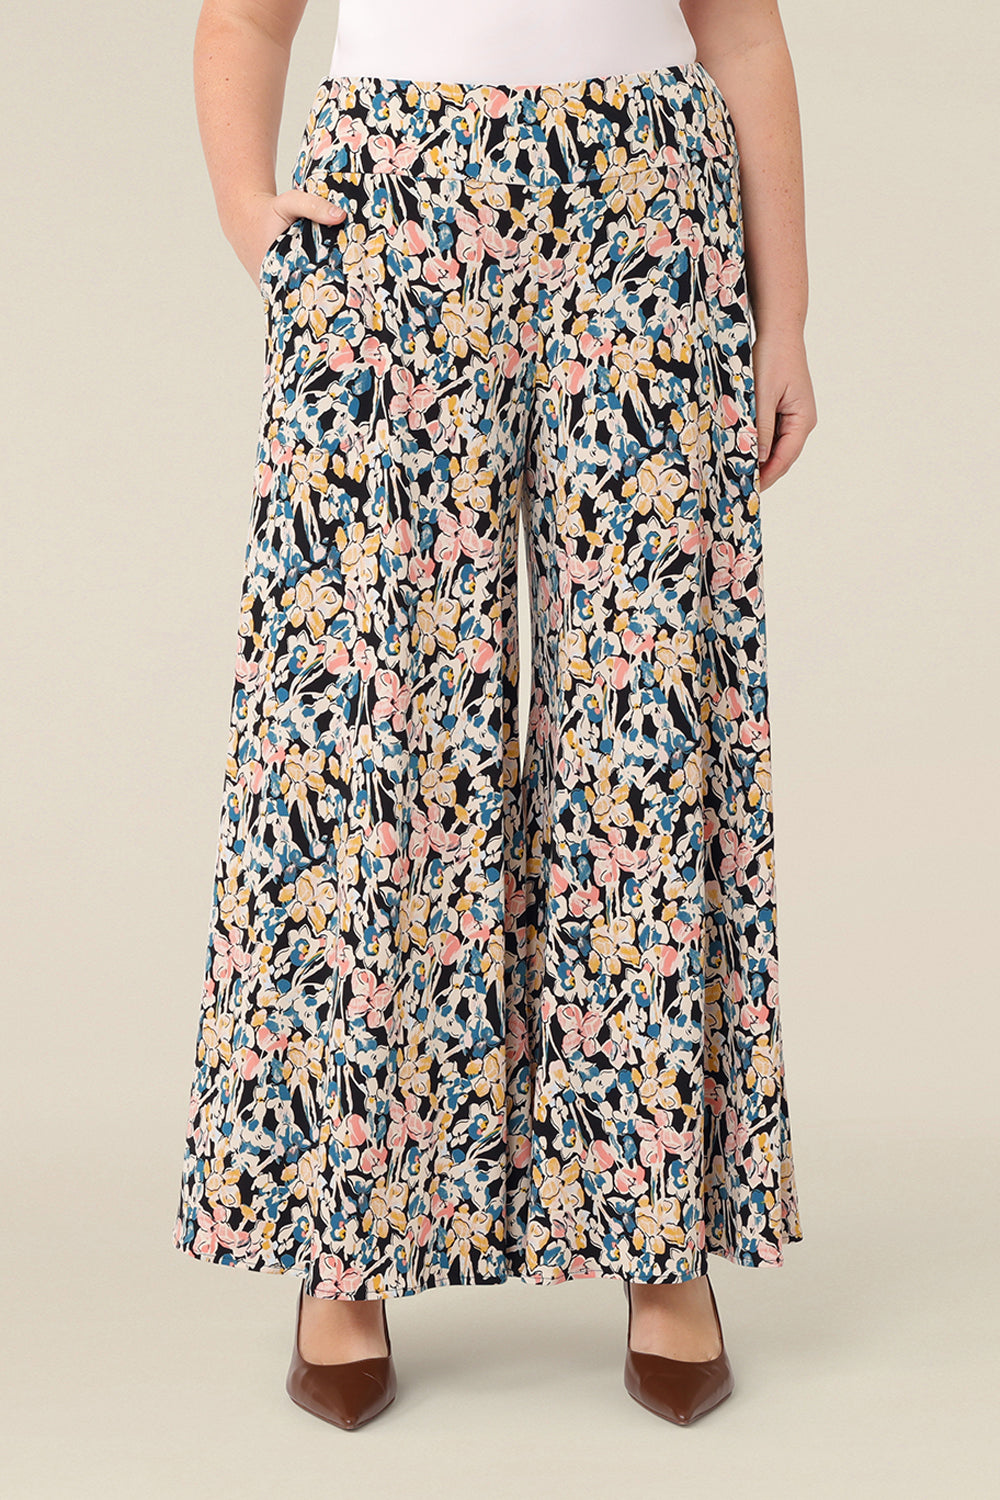 A curvy size, size 12 woman wears floral printed wide leg pants with pockets. These pull-on, easy care pants are comfortable for your everyday capsule wardrobe. Shop these Australian-made wide leg trousers online in sizes 8 to 24, petite to plus sizes.